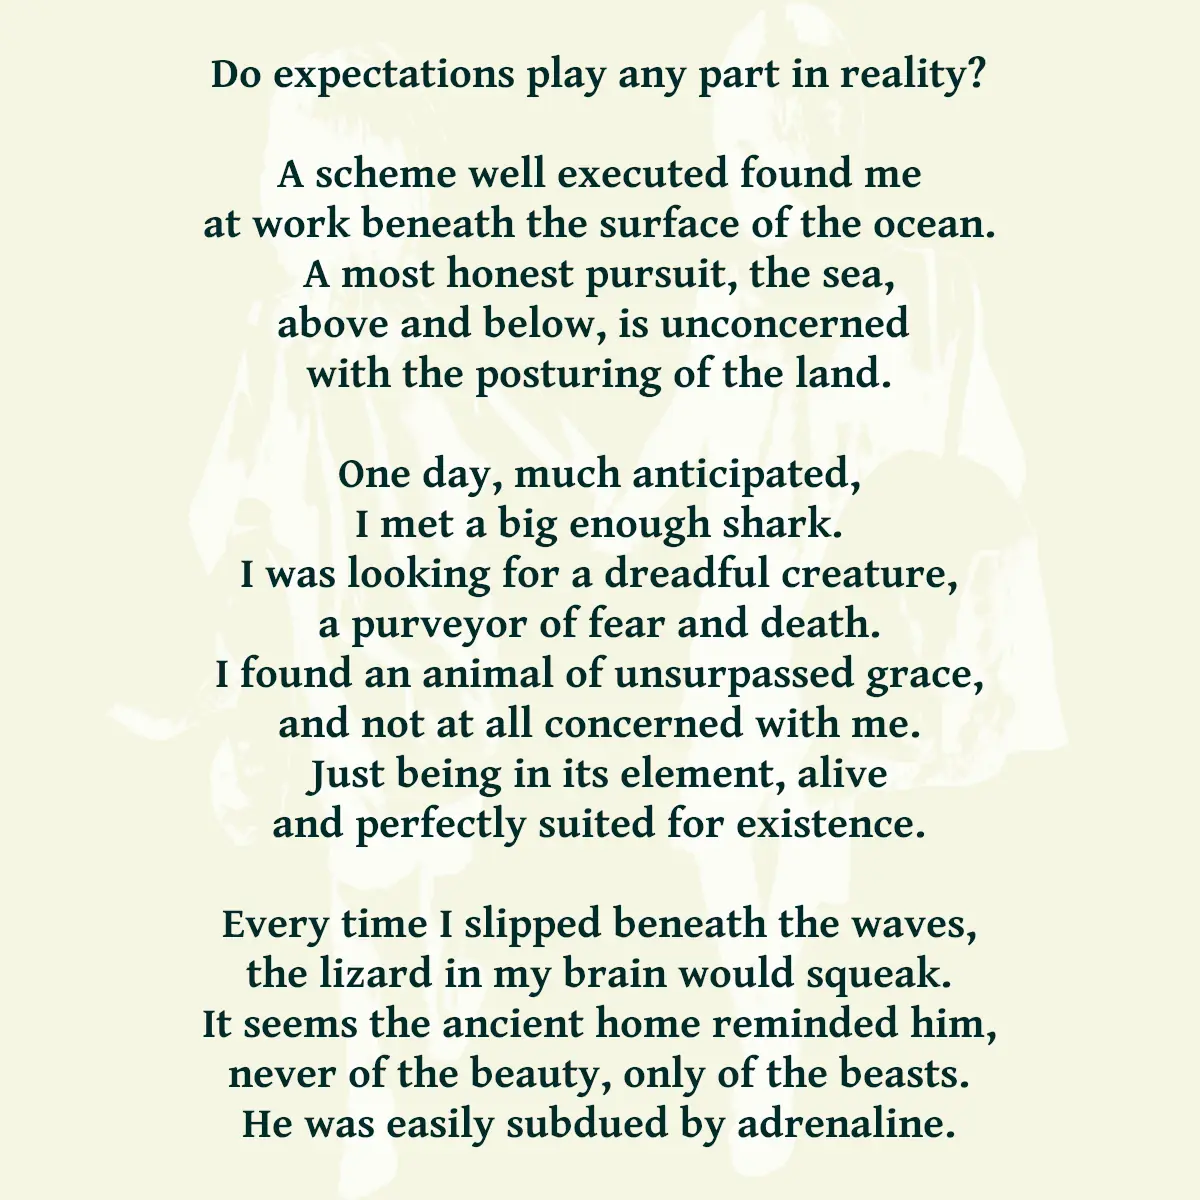 Do expectations play any part in reality? A scheme well executed found me at work beneath the surface of the ocean. A most honest pursuit, the sea, above and below, is unconcerned with the posturing of the land. One day, much anticipated, I met a big enough shark. I was looking for a dreadful creature, a purveyor of fear and death. I found an animal of unsurpassed grace, and not at all concerned with me. Just being in its element, alive and perfectly suited for existence. Every time I slipped beneath the waves, the lizard in my brain would squeak. It seems the ancient home reminded him, never of the beauty, only of the beasts. He was easily subdued by adrenaline.